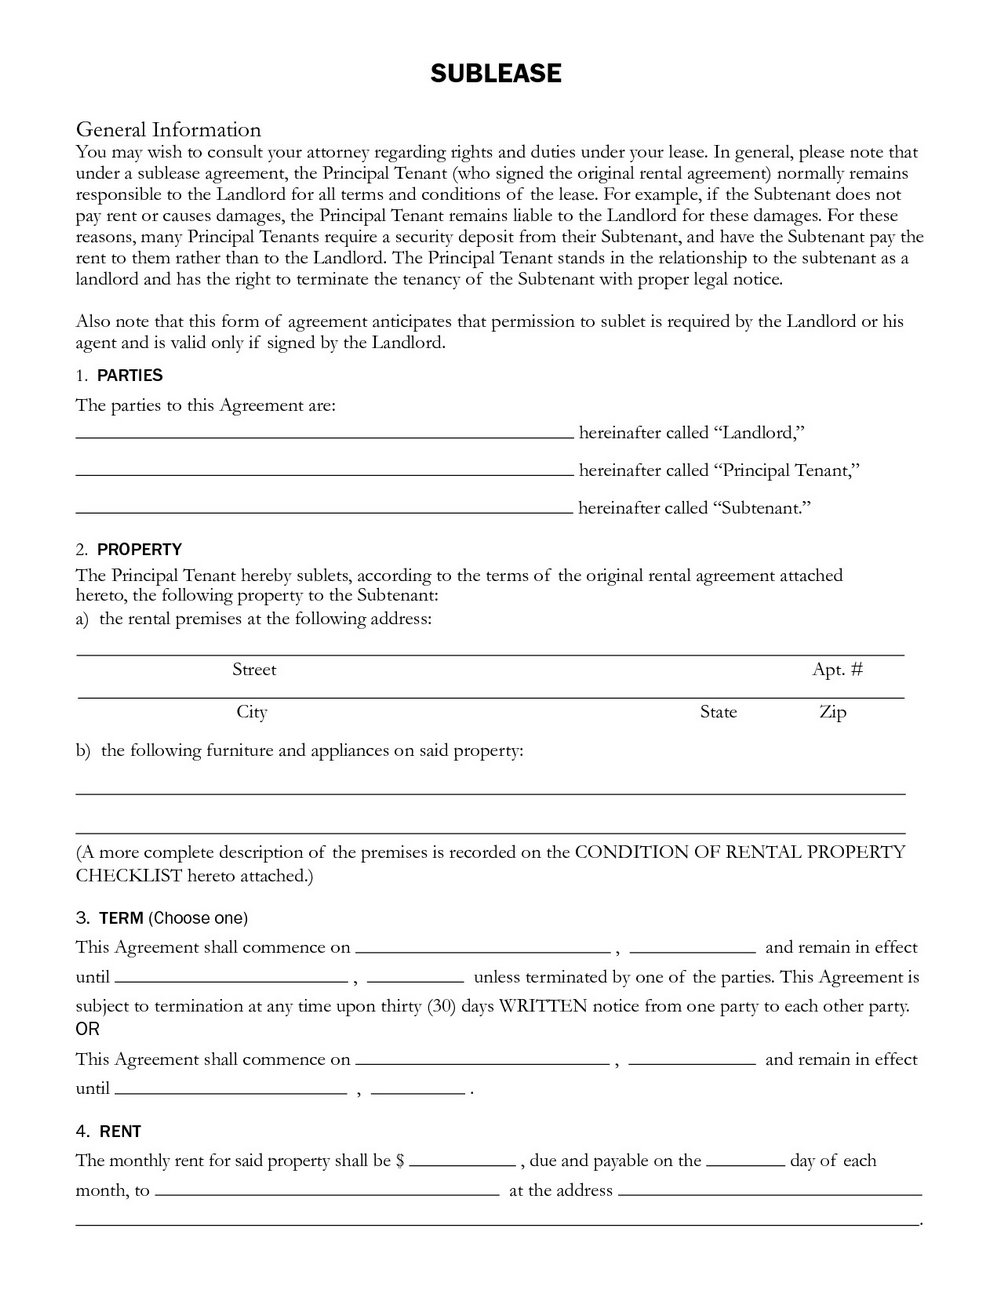 California Commercial Sublease Agreement Sublease Agreement Form Bc Forms 4349 Resume Examples